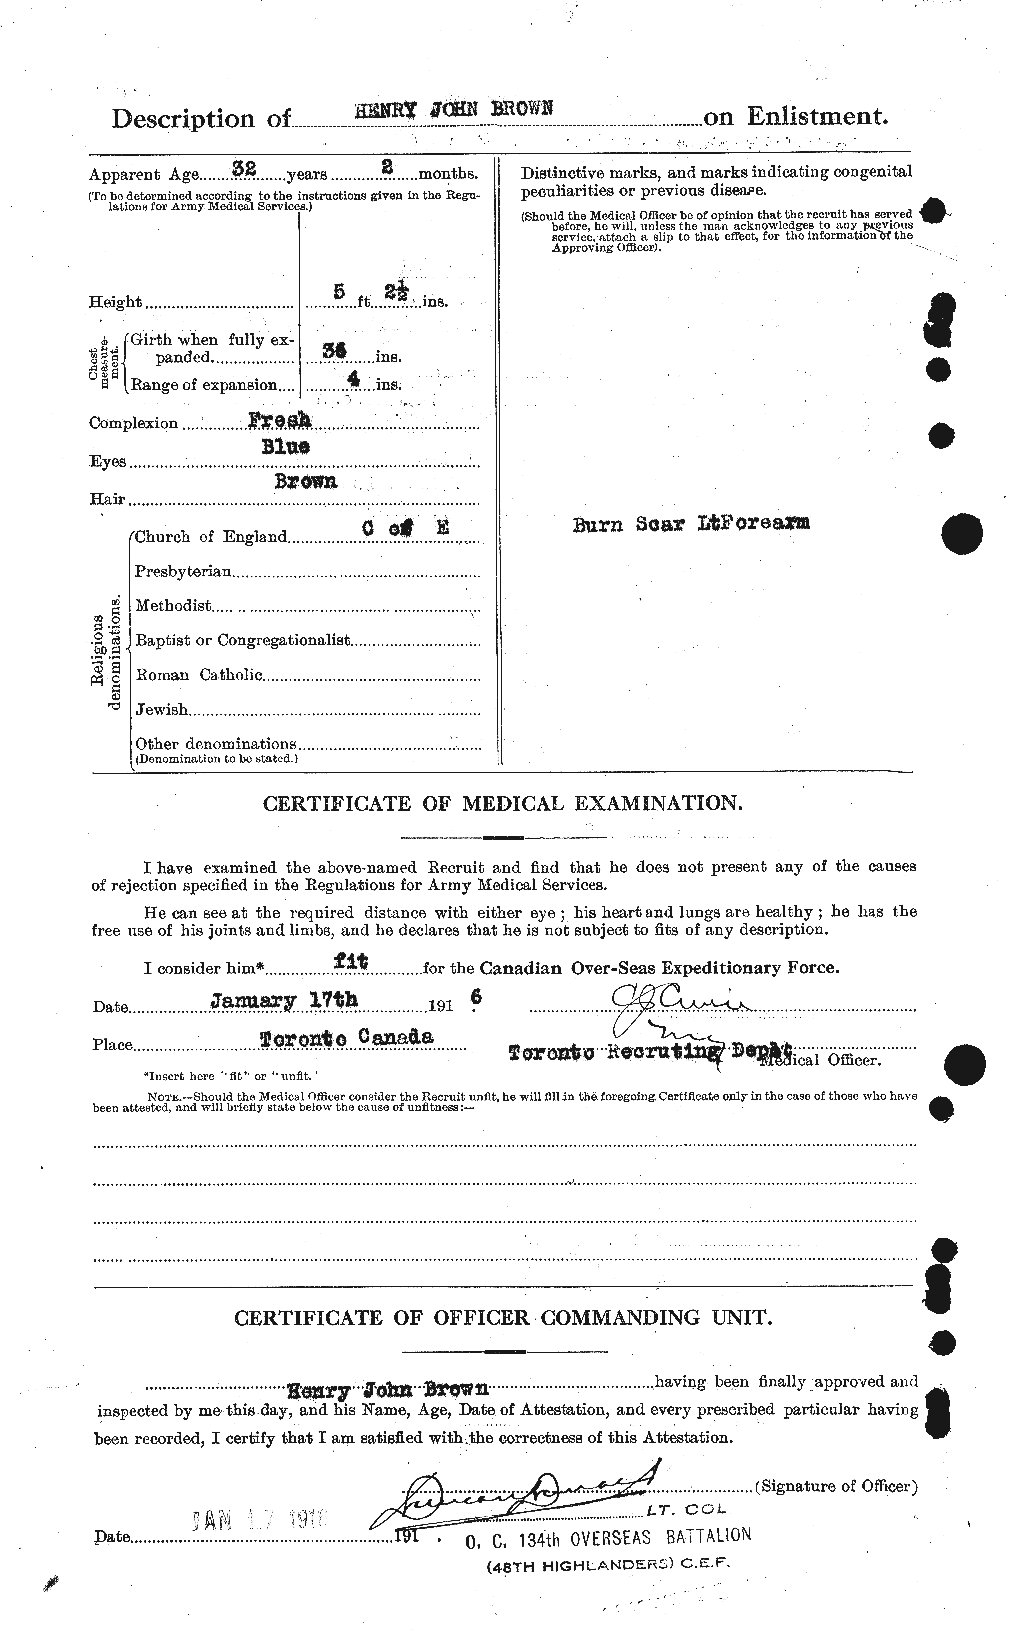 Personnel Records of the First World War - CEF 200659b